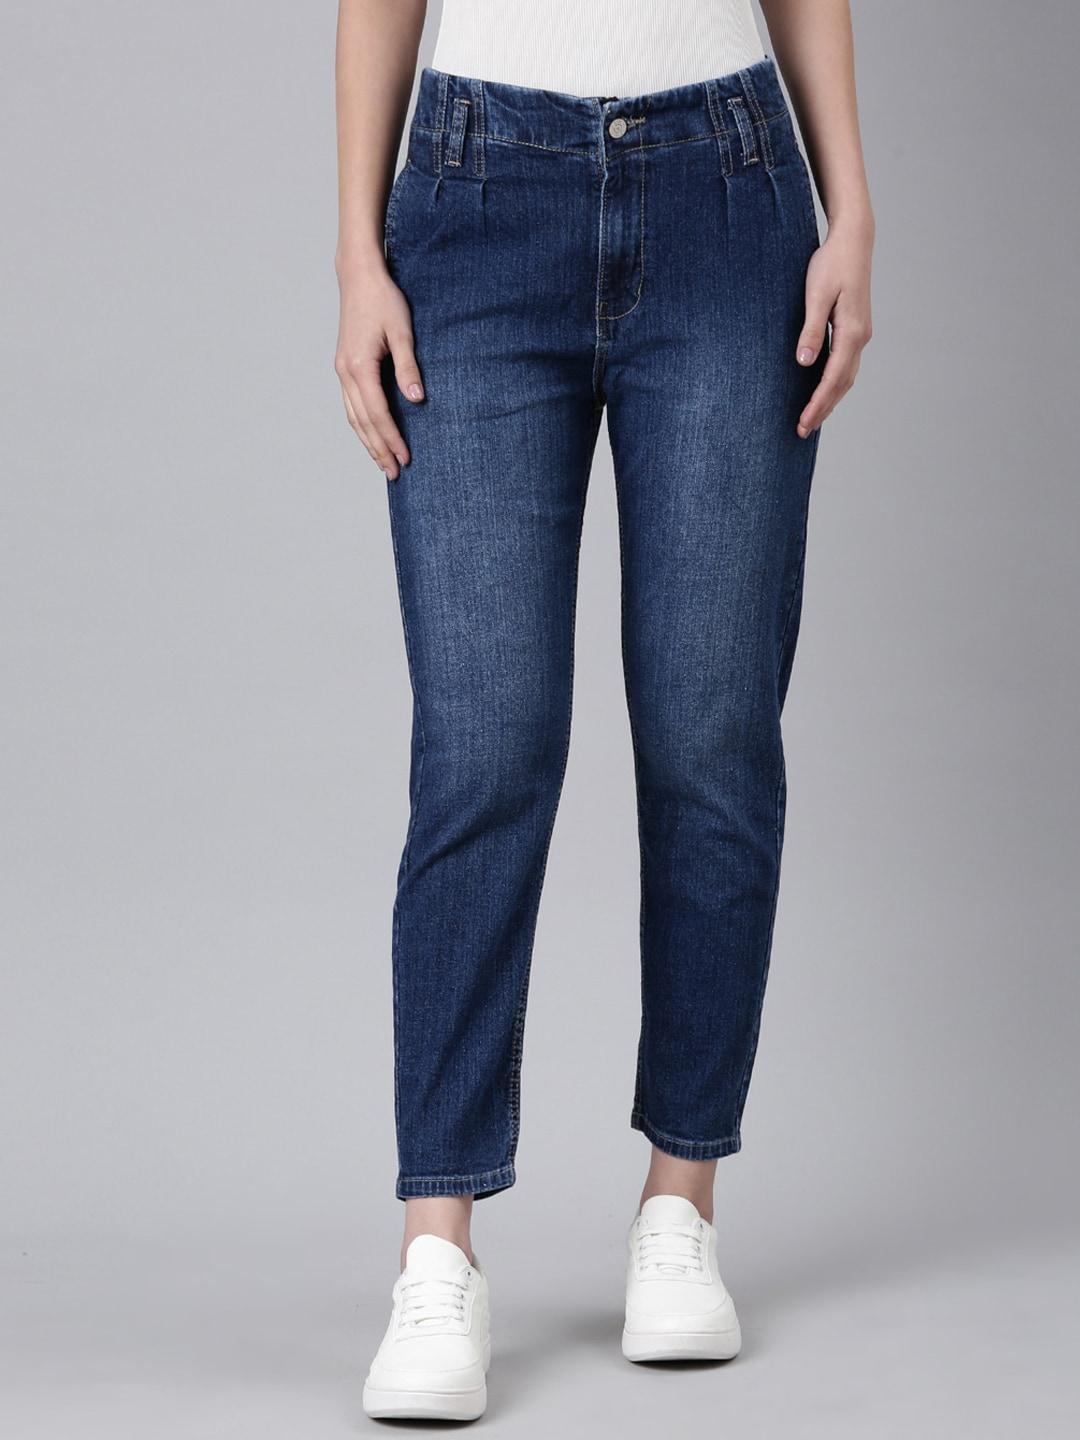 showoff-women-mom-fit-light-fade-clean-look-stretchable-jeans